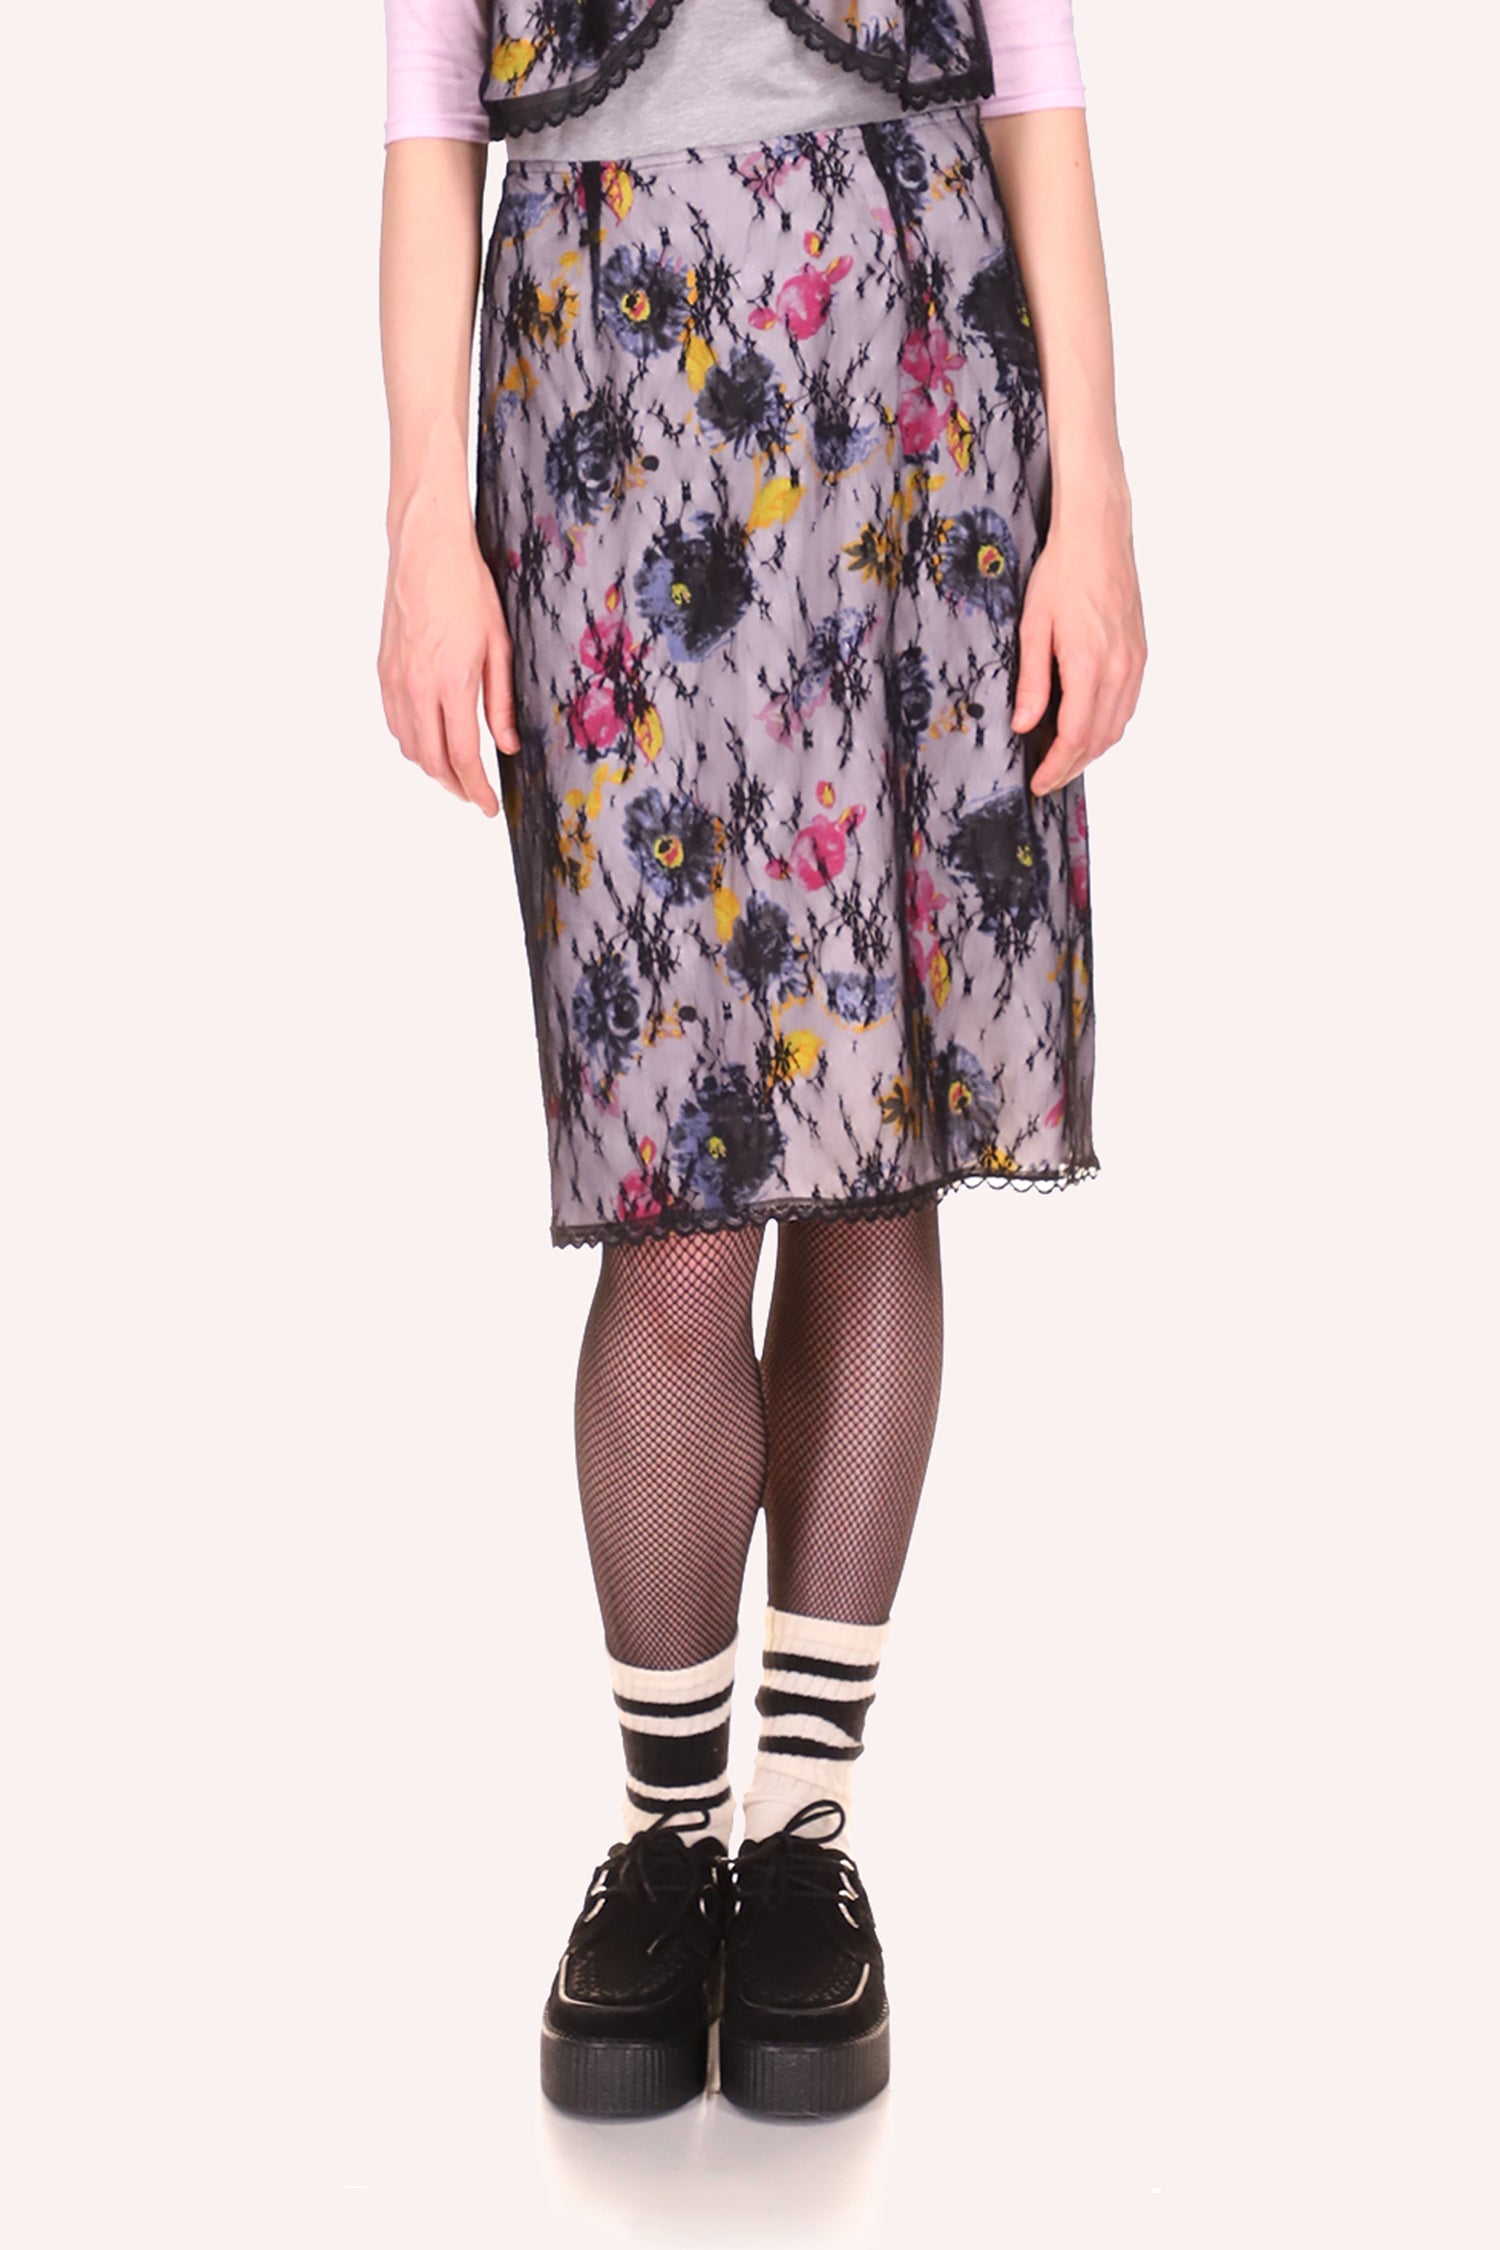 Slip Skirt knee-long, pattern of large lilac, double pink, and yellow colors flowers, bottom hems in black lace